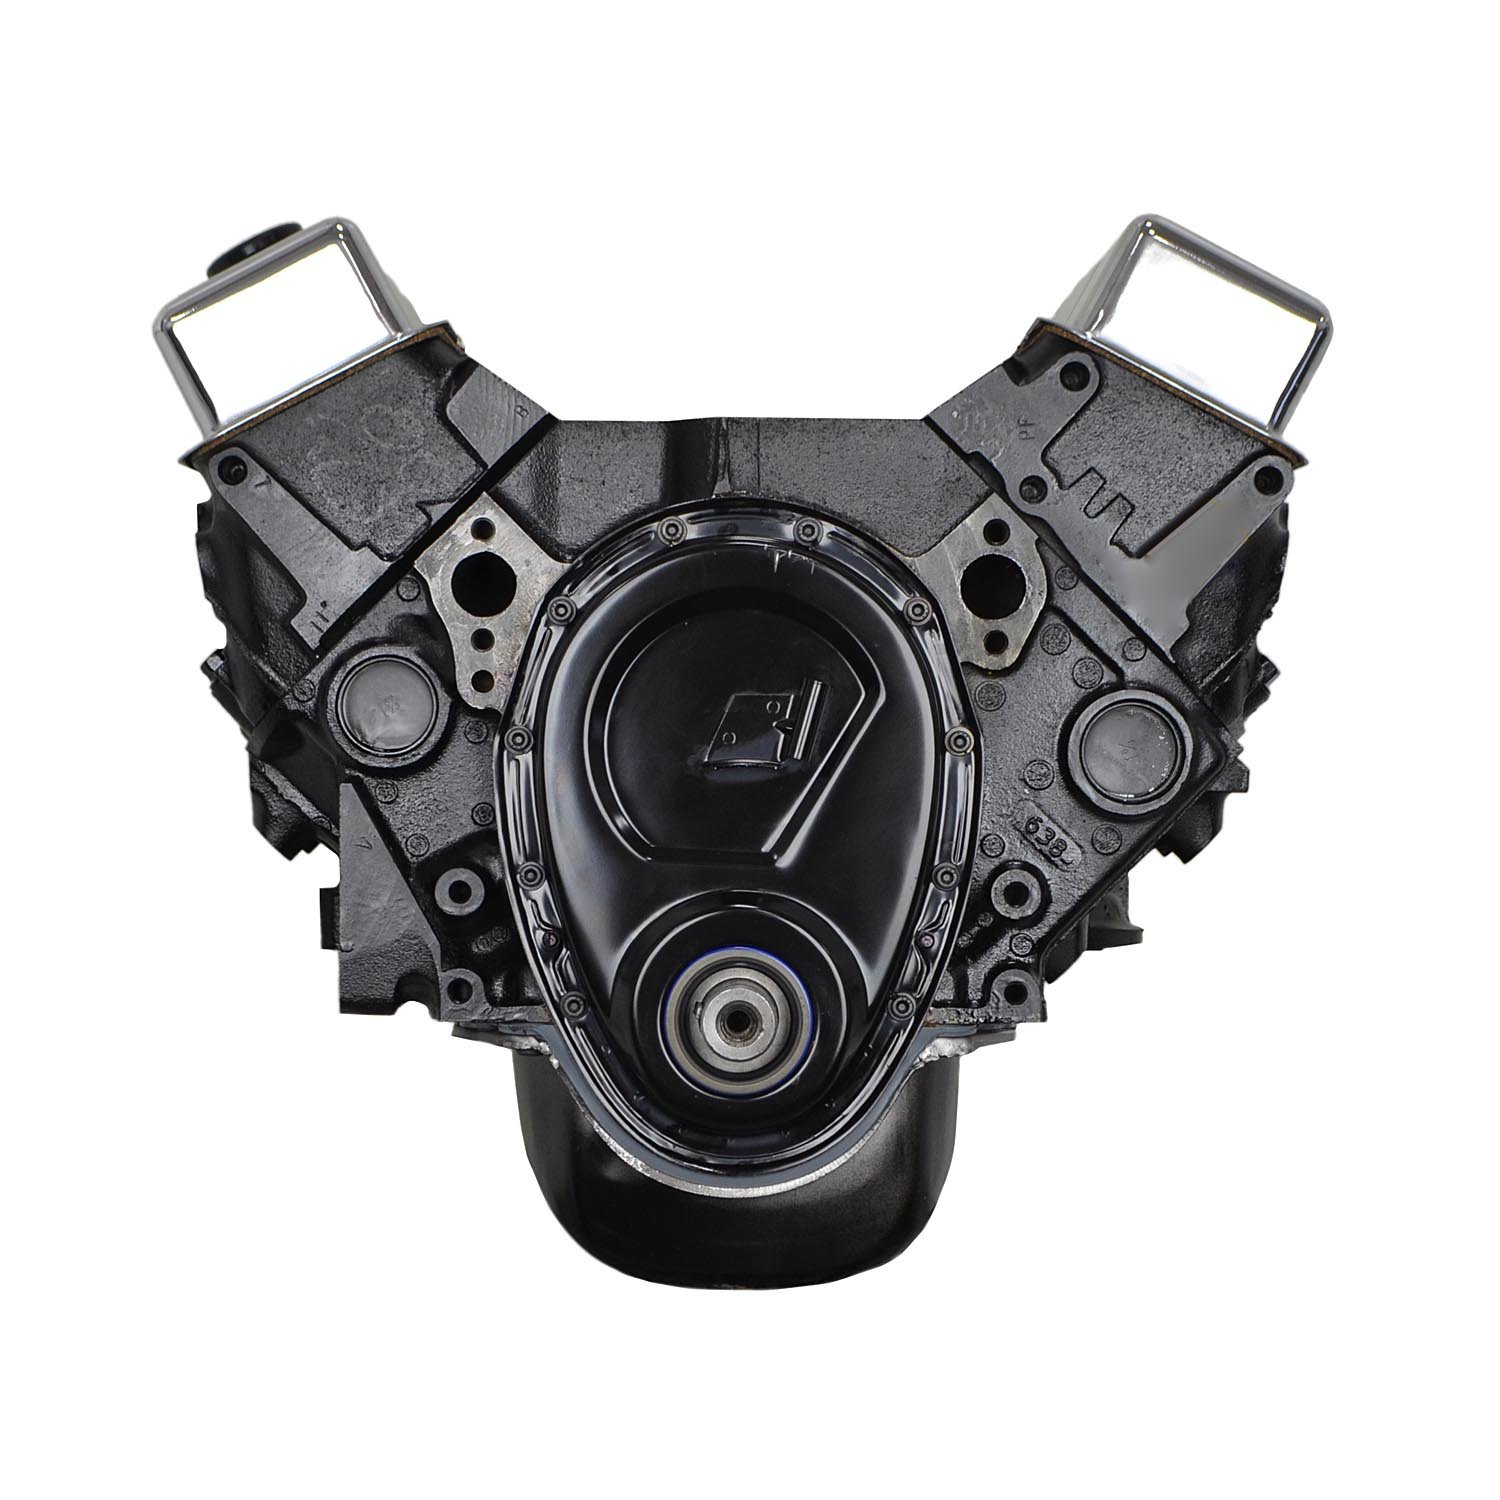 VC96 Remanufactured Crate Engine for 1986 Chevy & GMC C/K Truck, Suburban, & G/P Van with 350ci/5.7L V8